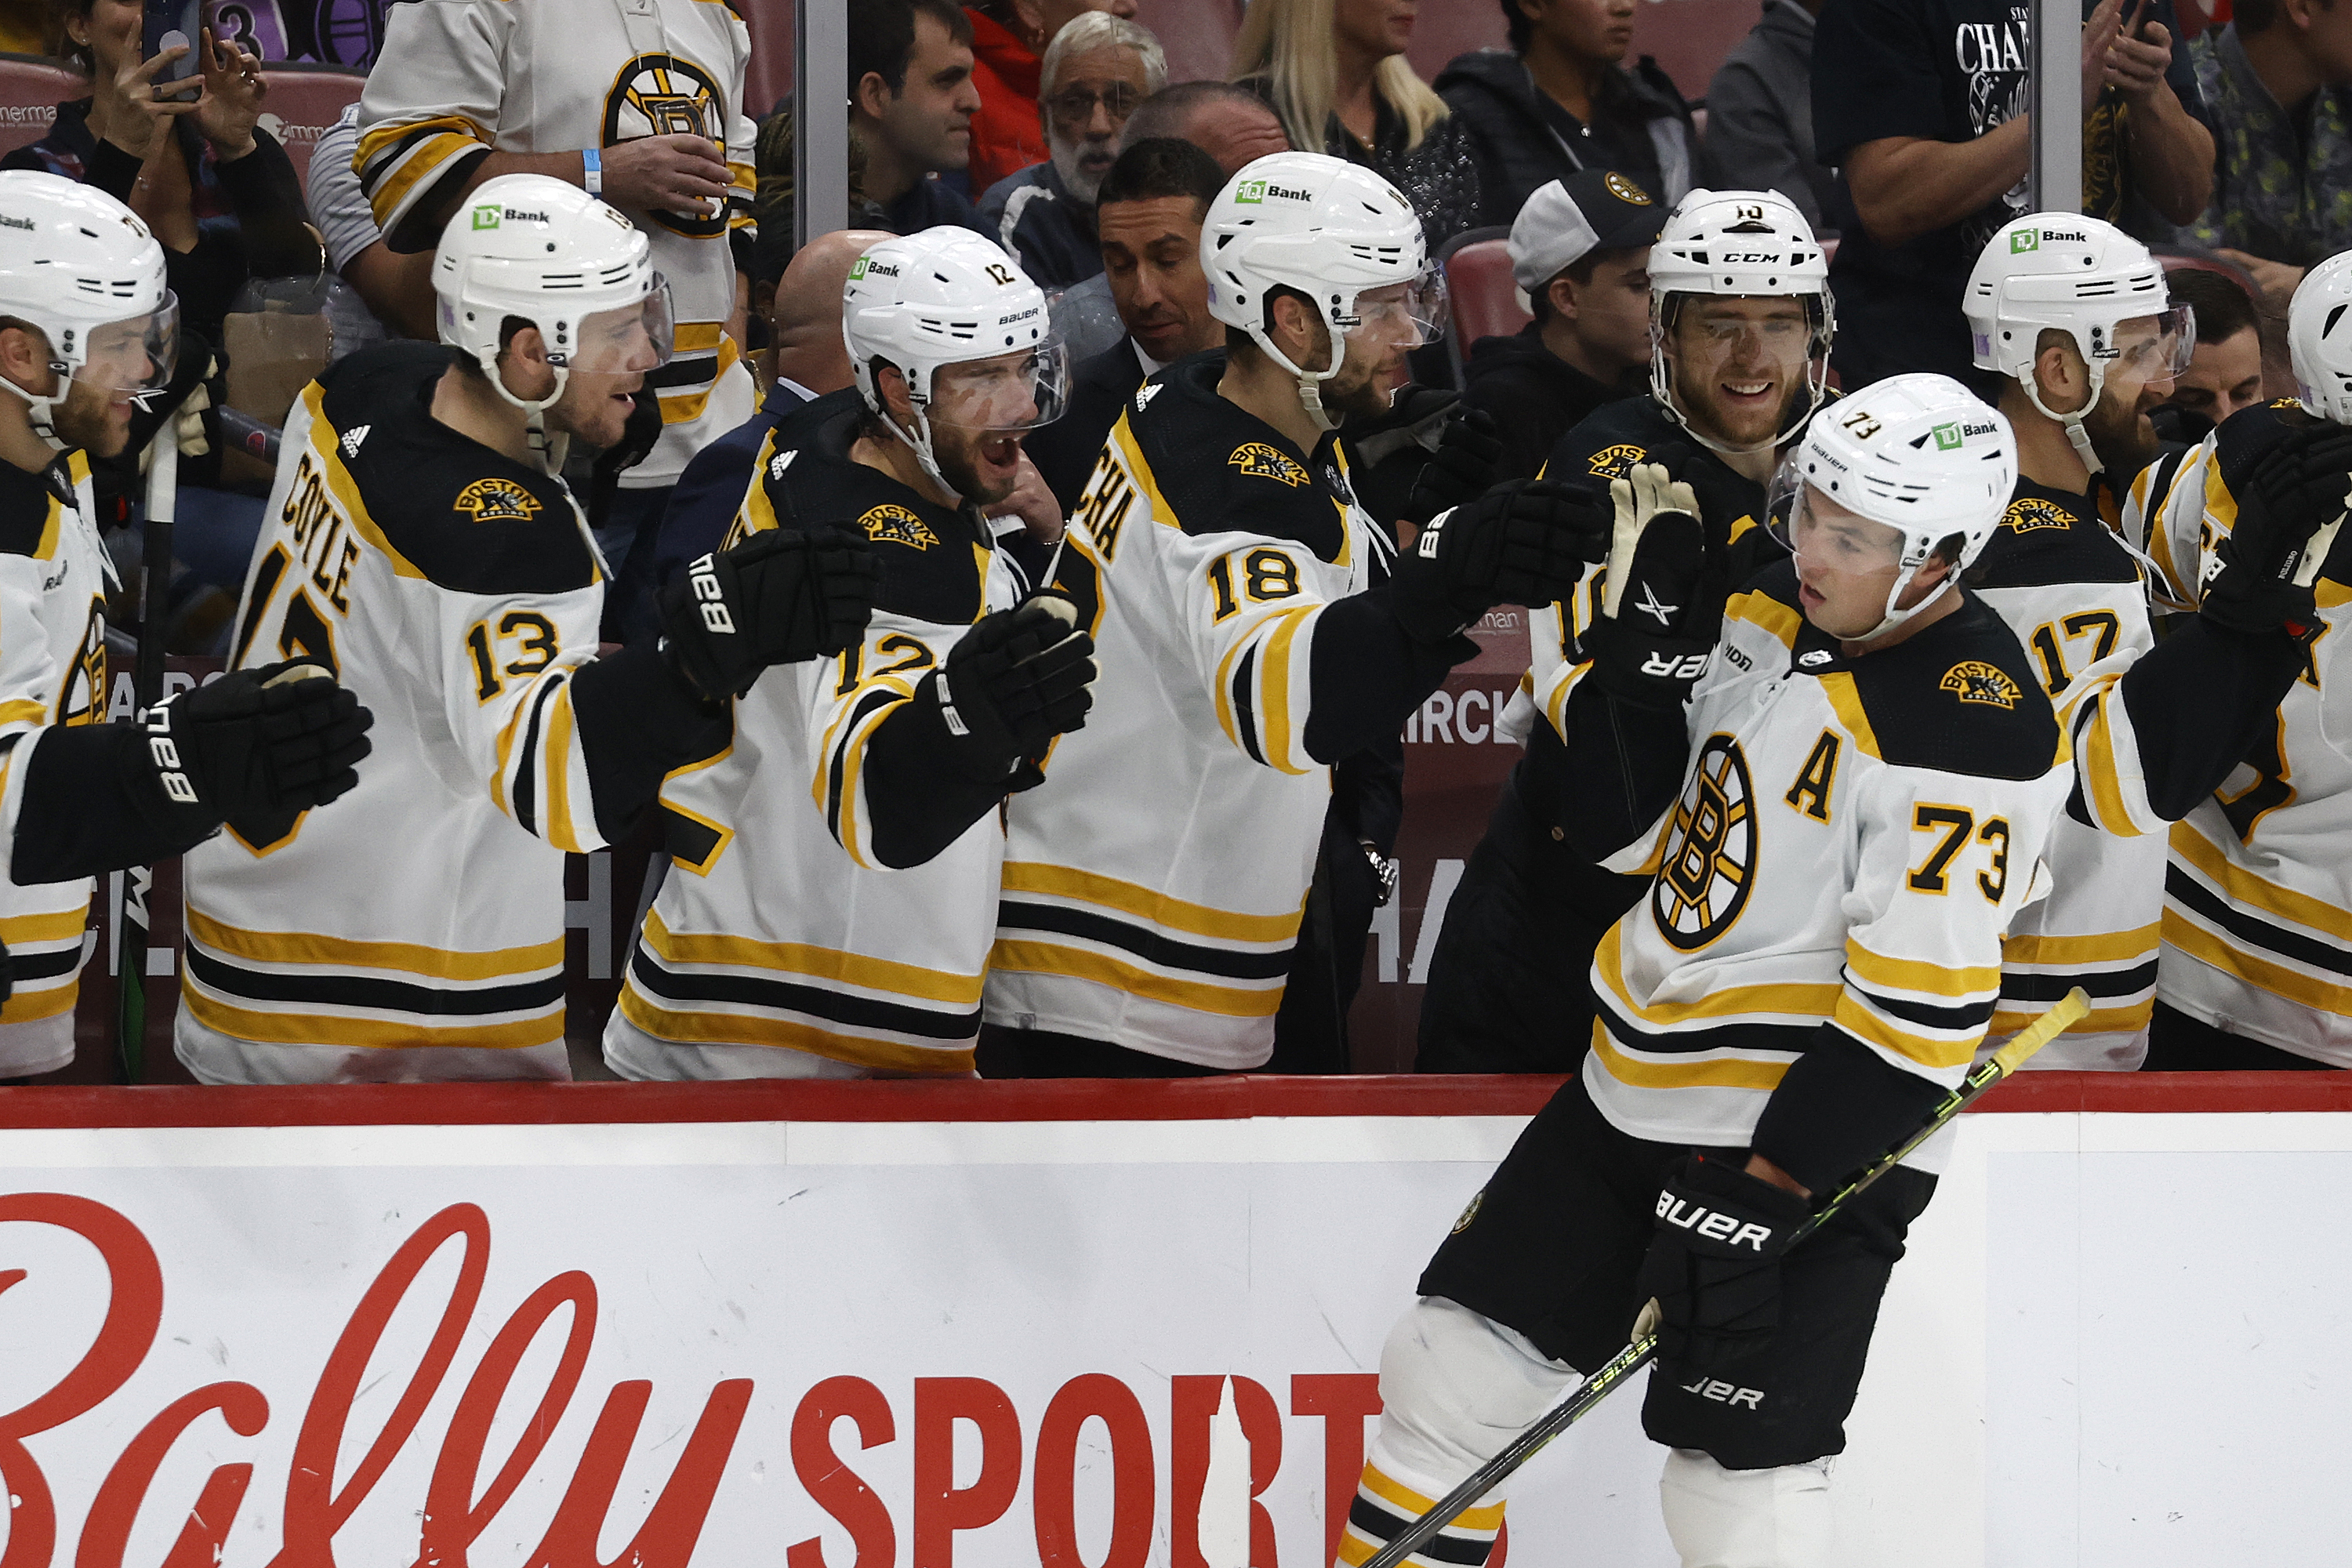 Bruins win streak halted at 7 with loss to Panthers